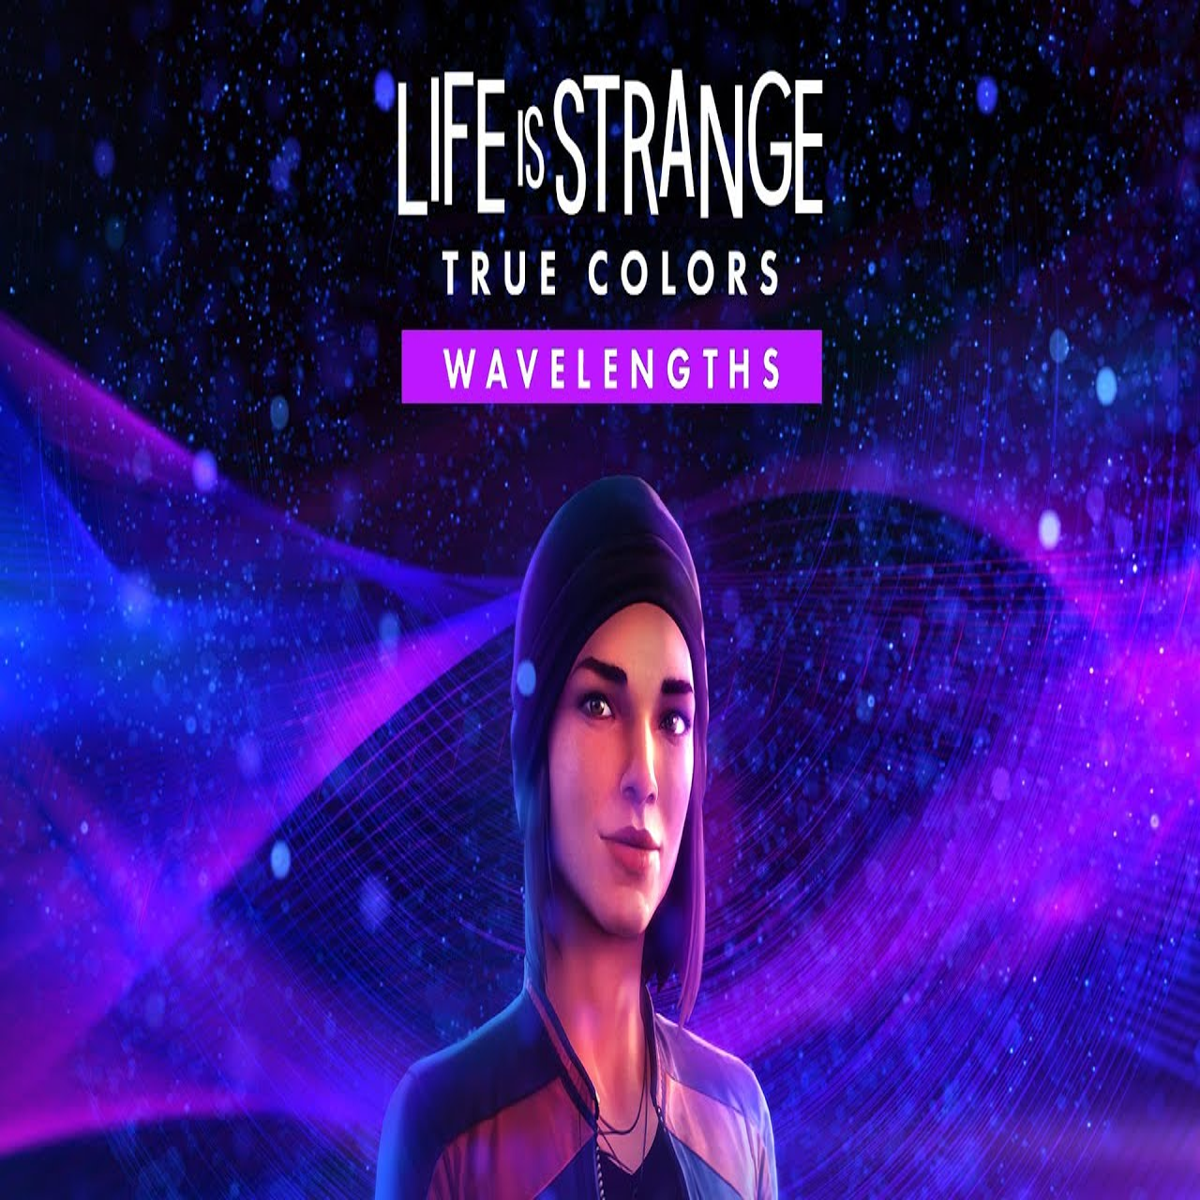 Life Is Strange: True Colors - Trailer, Plot, Release Date & News to Know